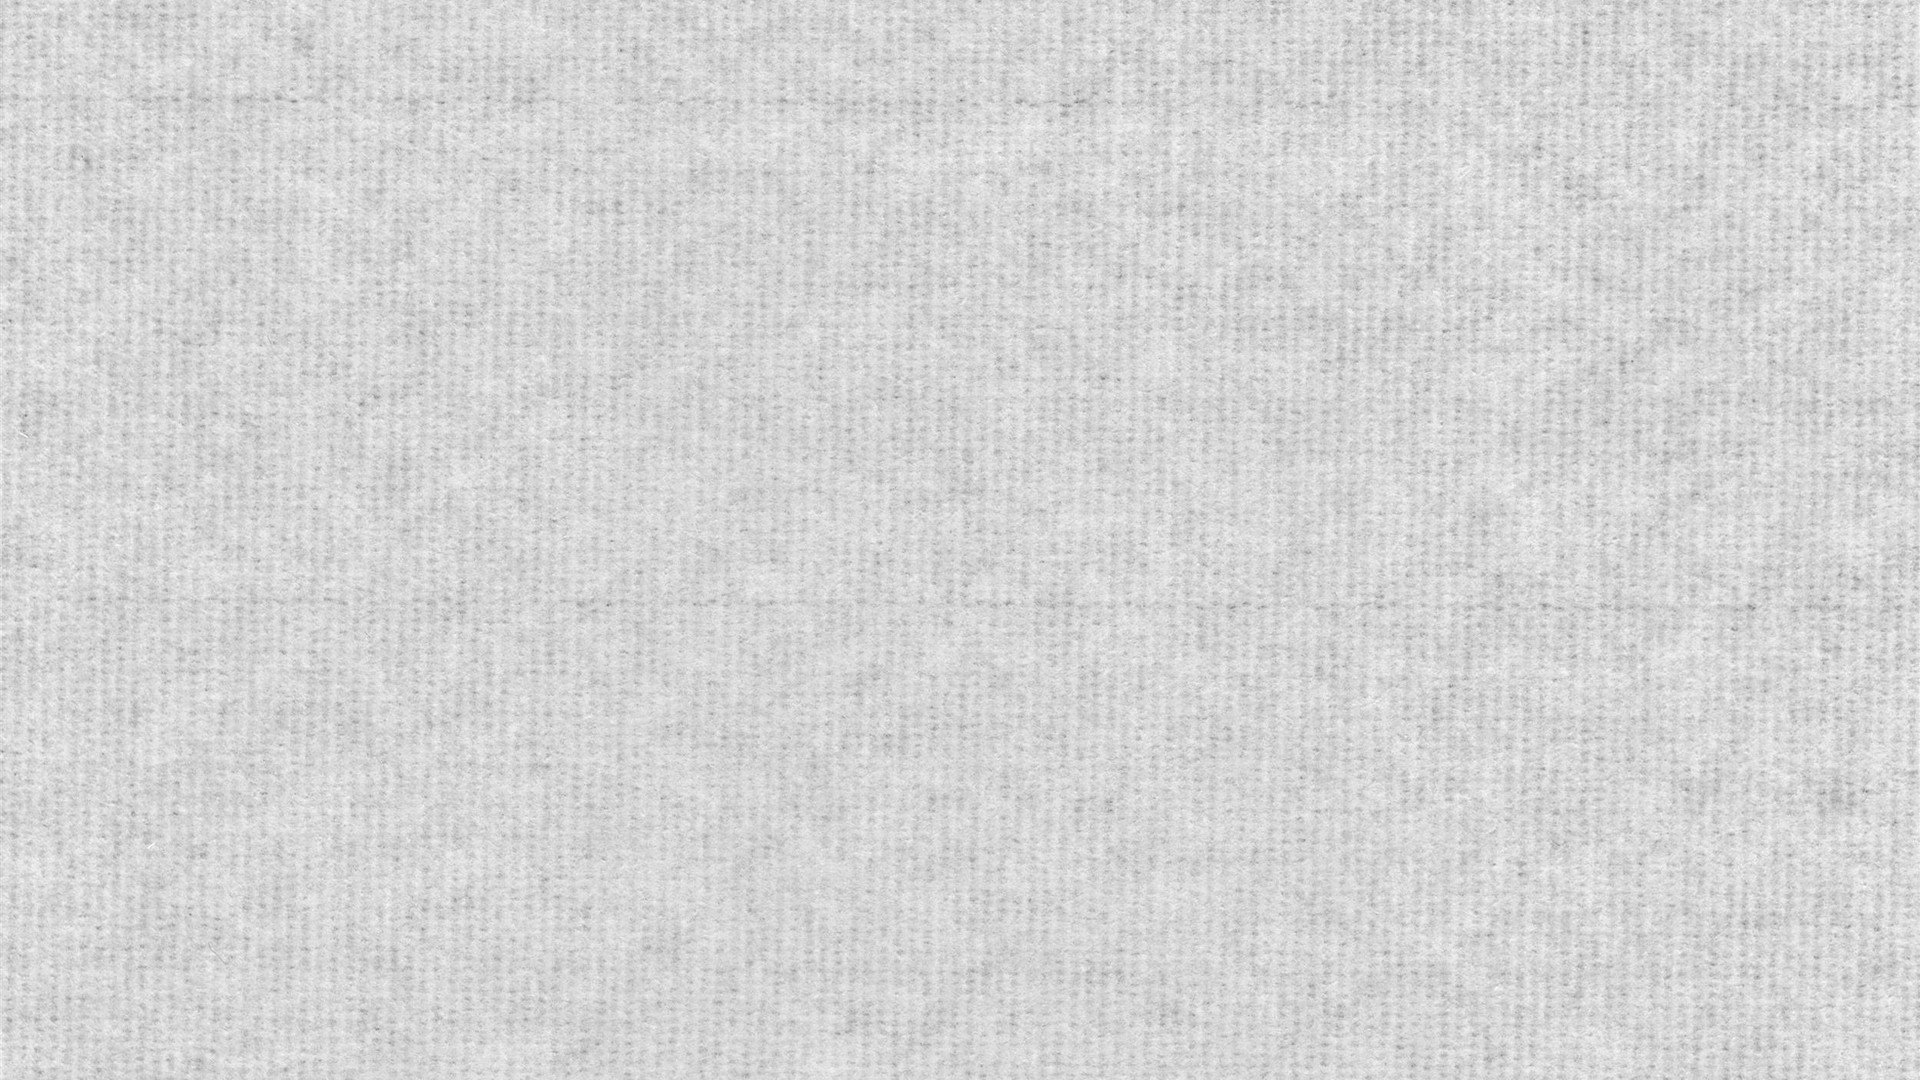 White Fabric Texture Background